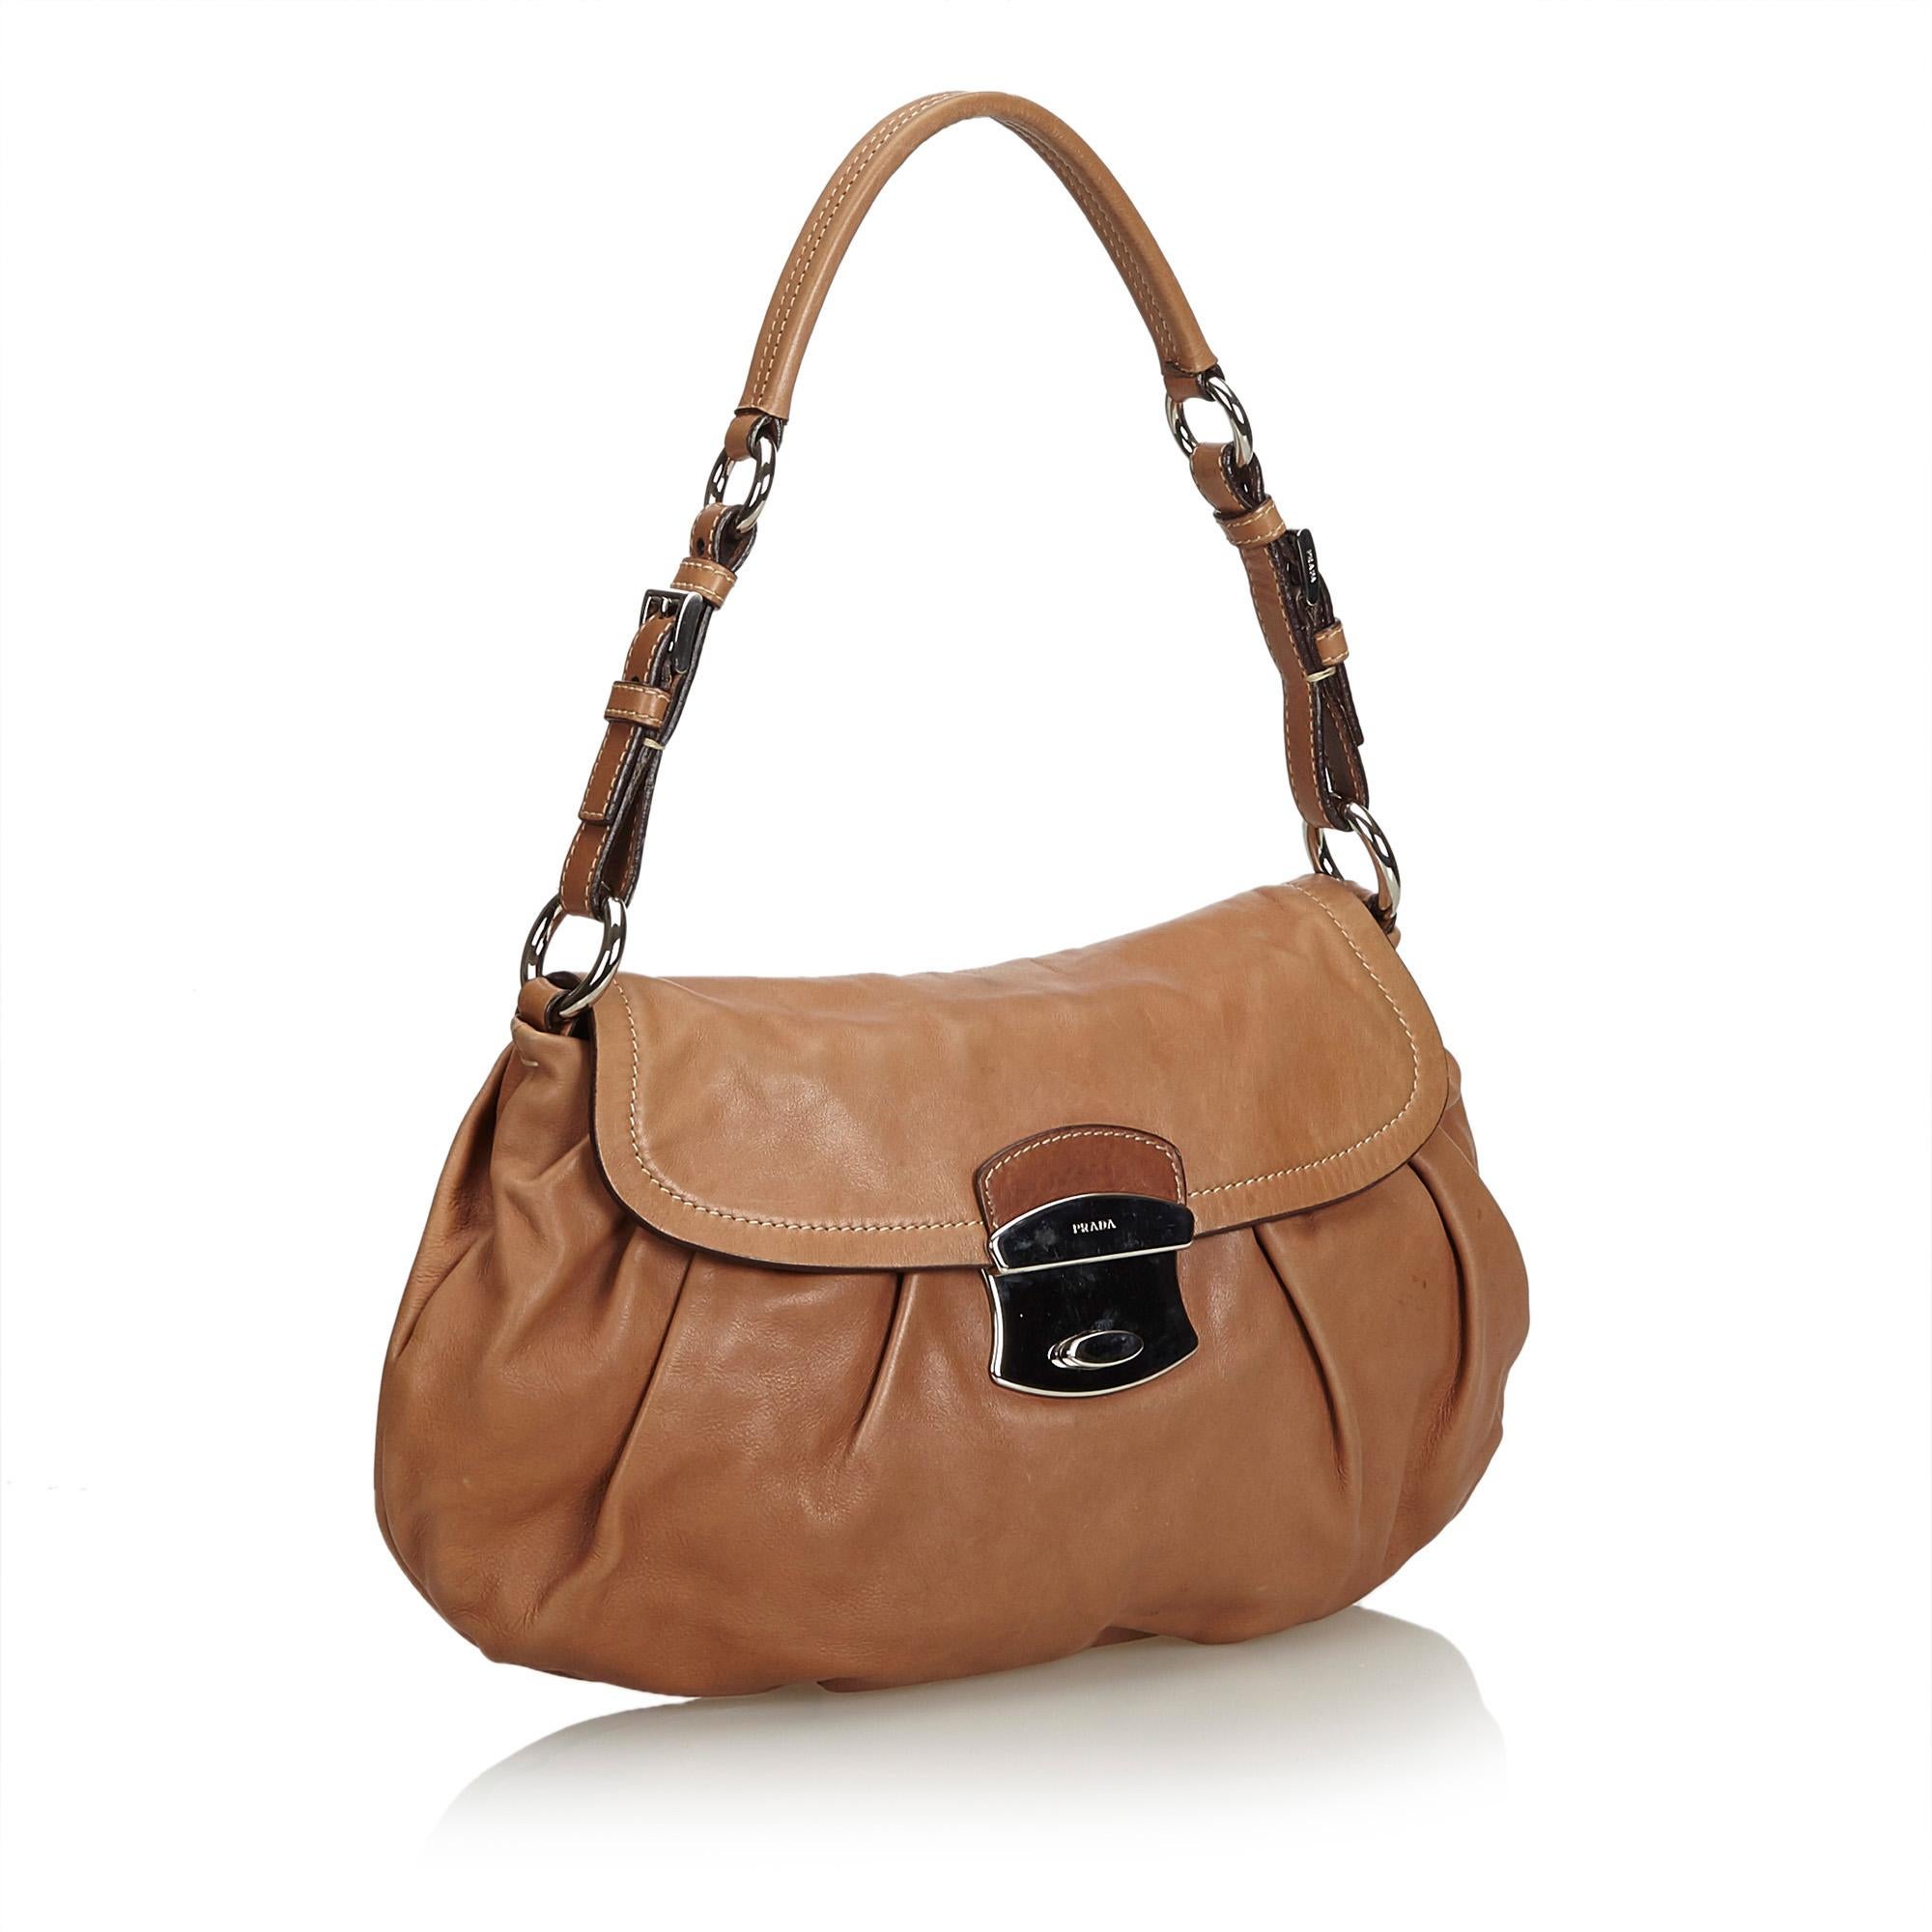 This baguette features a leather body, a flat adjustable leather strap, a front flap with a metal lock closure, an open top wih a magnetic closure, and an interior zip pocket. It carries as B+ condition rating.

Inclusions: 
Dust Bag
Authenticity